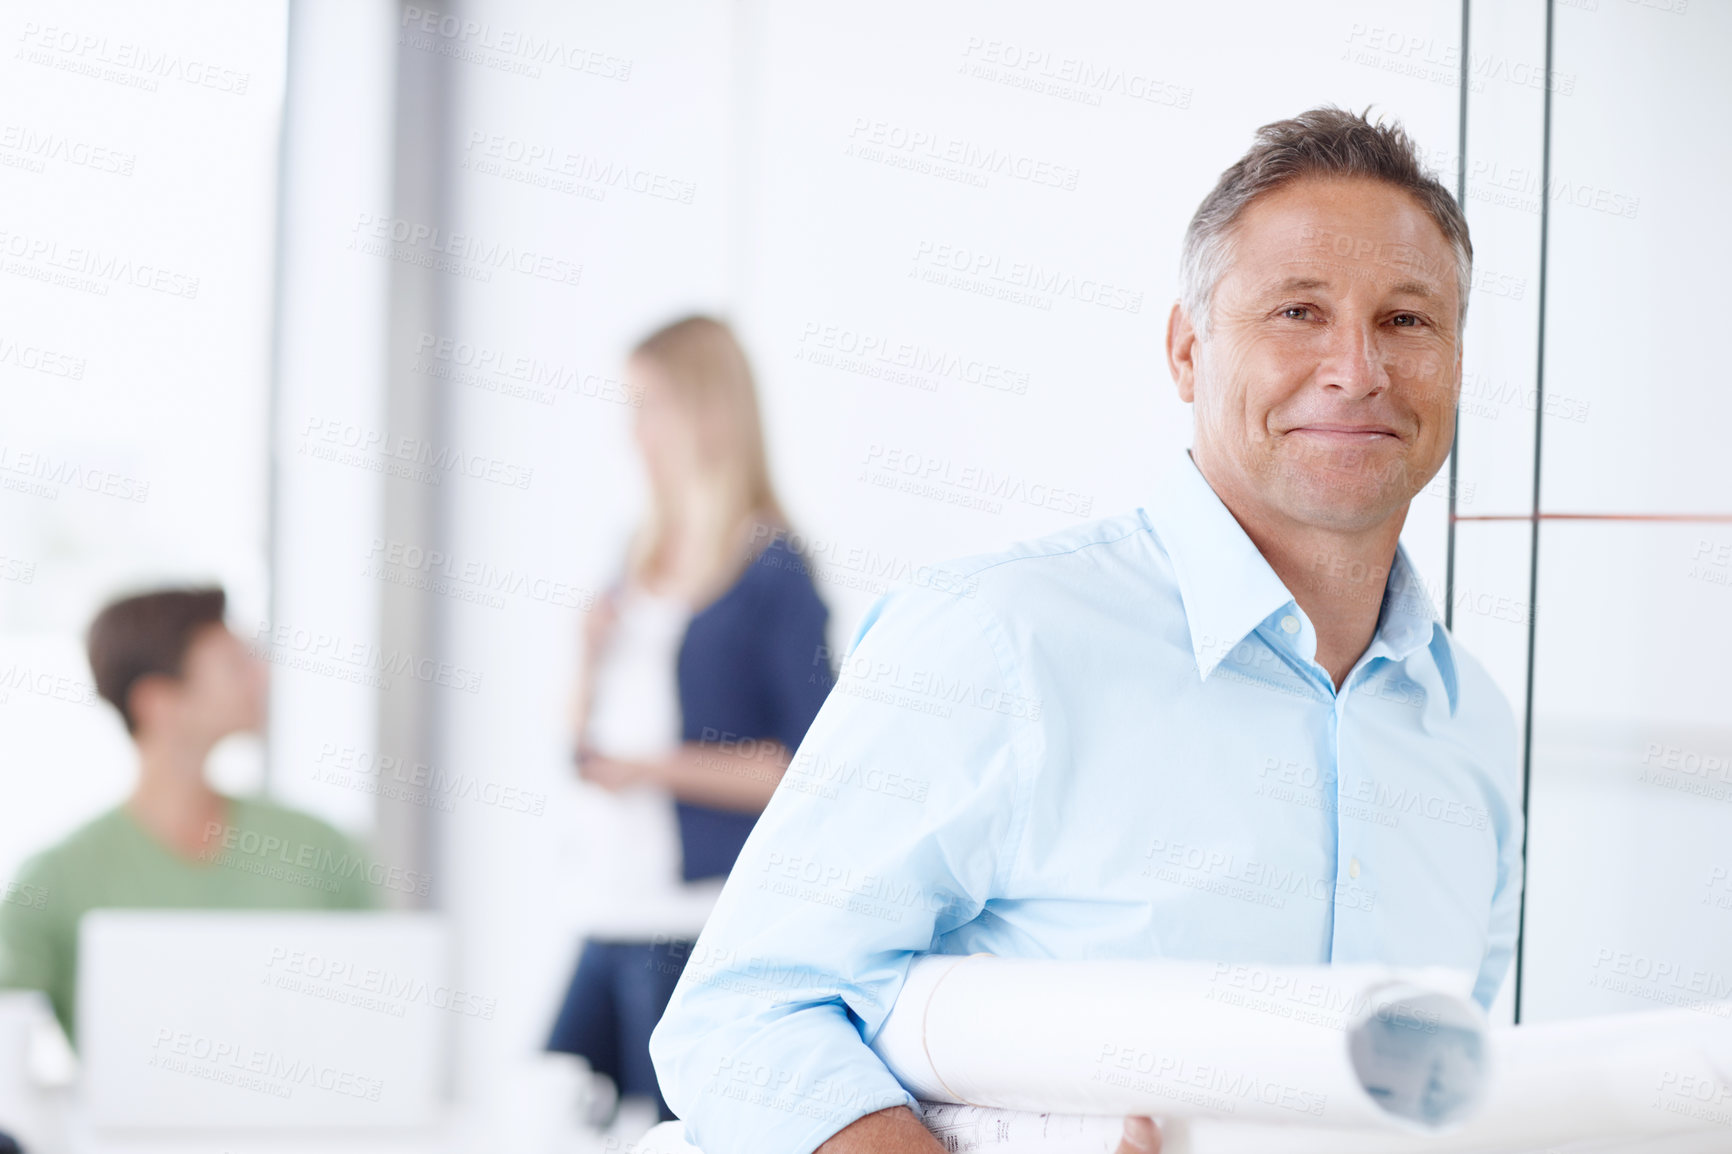 Buy stock photo A mature architect leaning against the door with his colleagues in the background